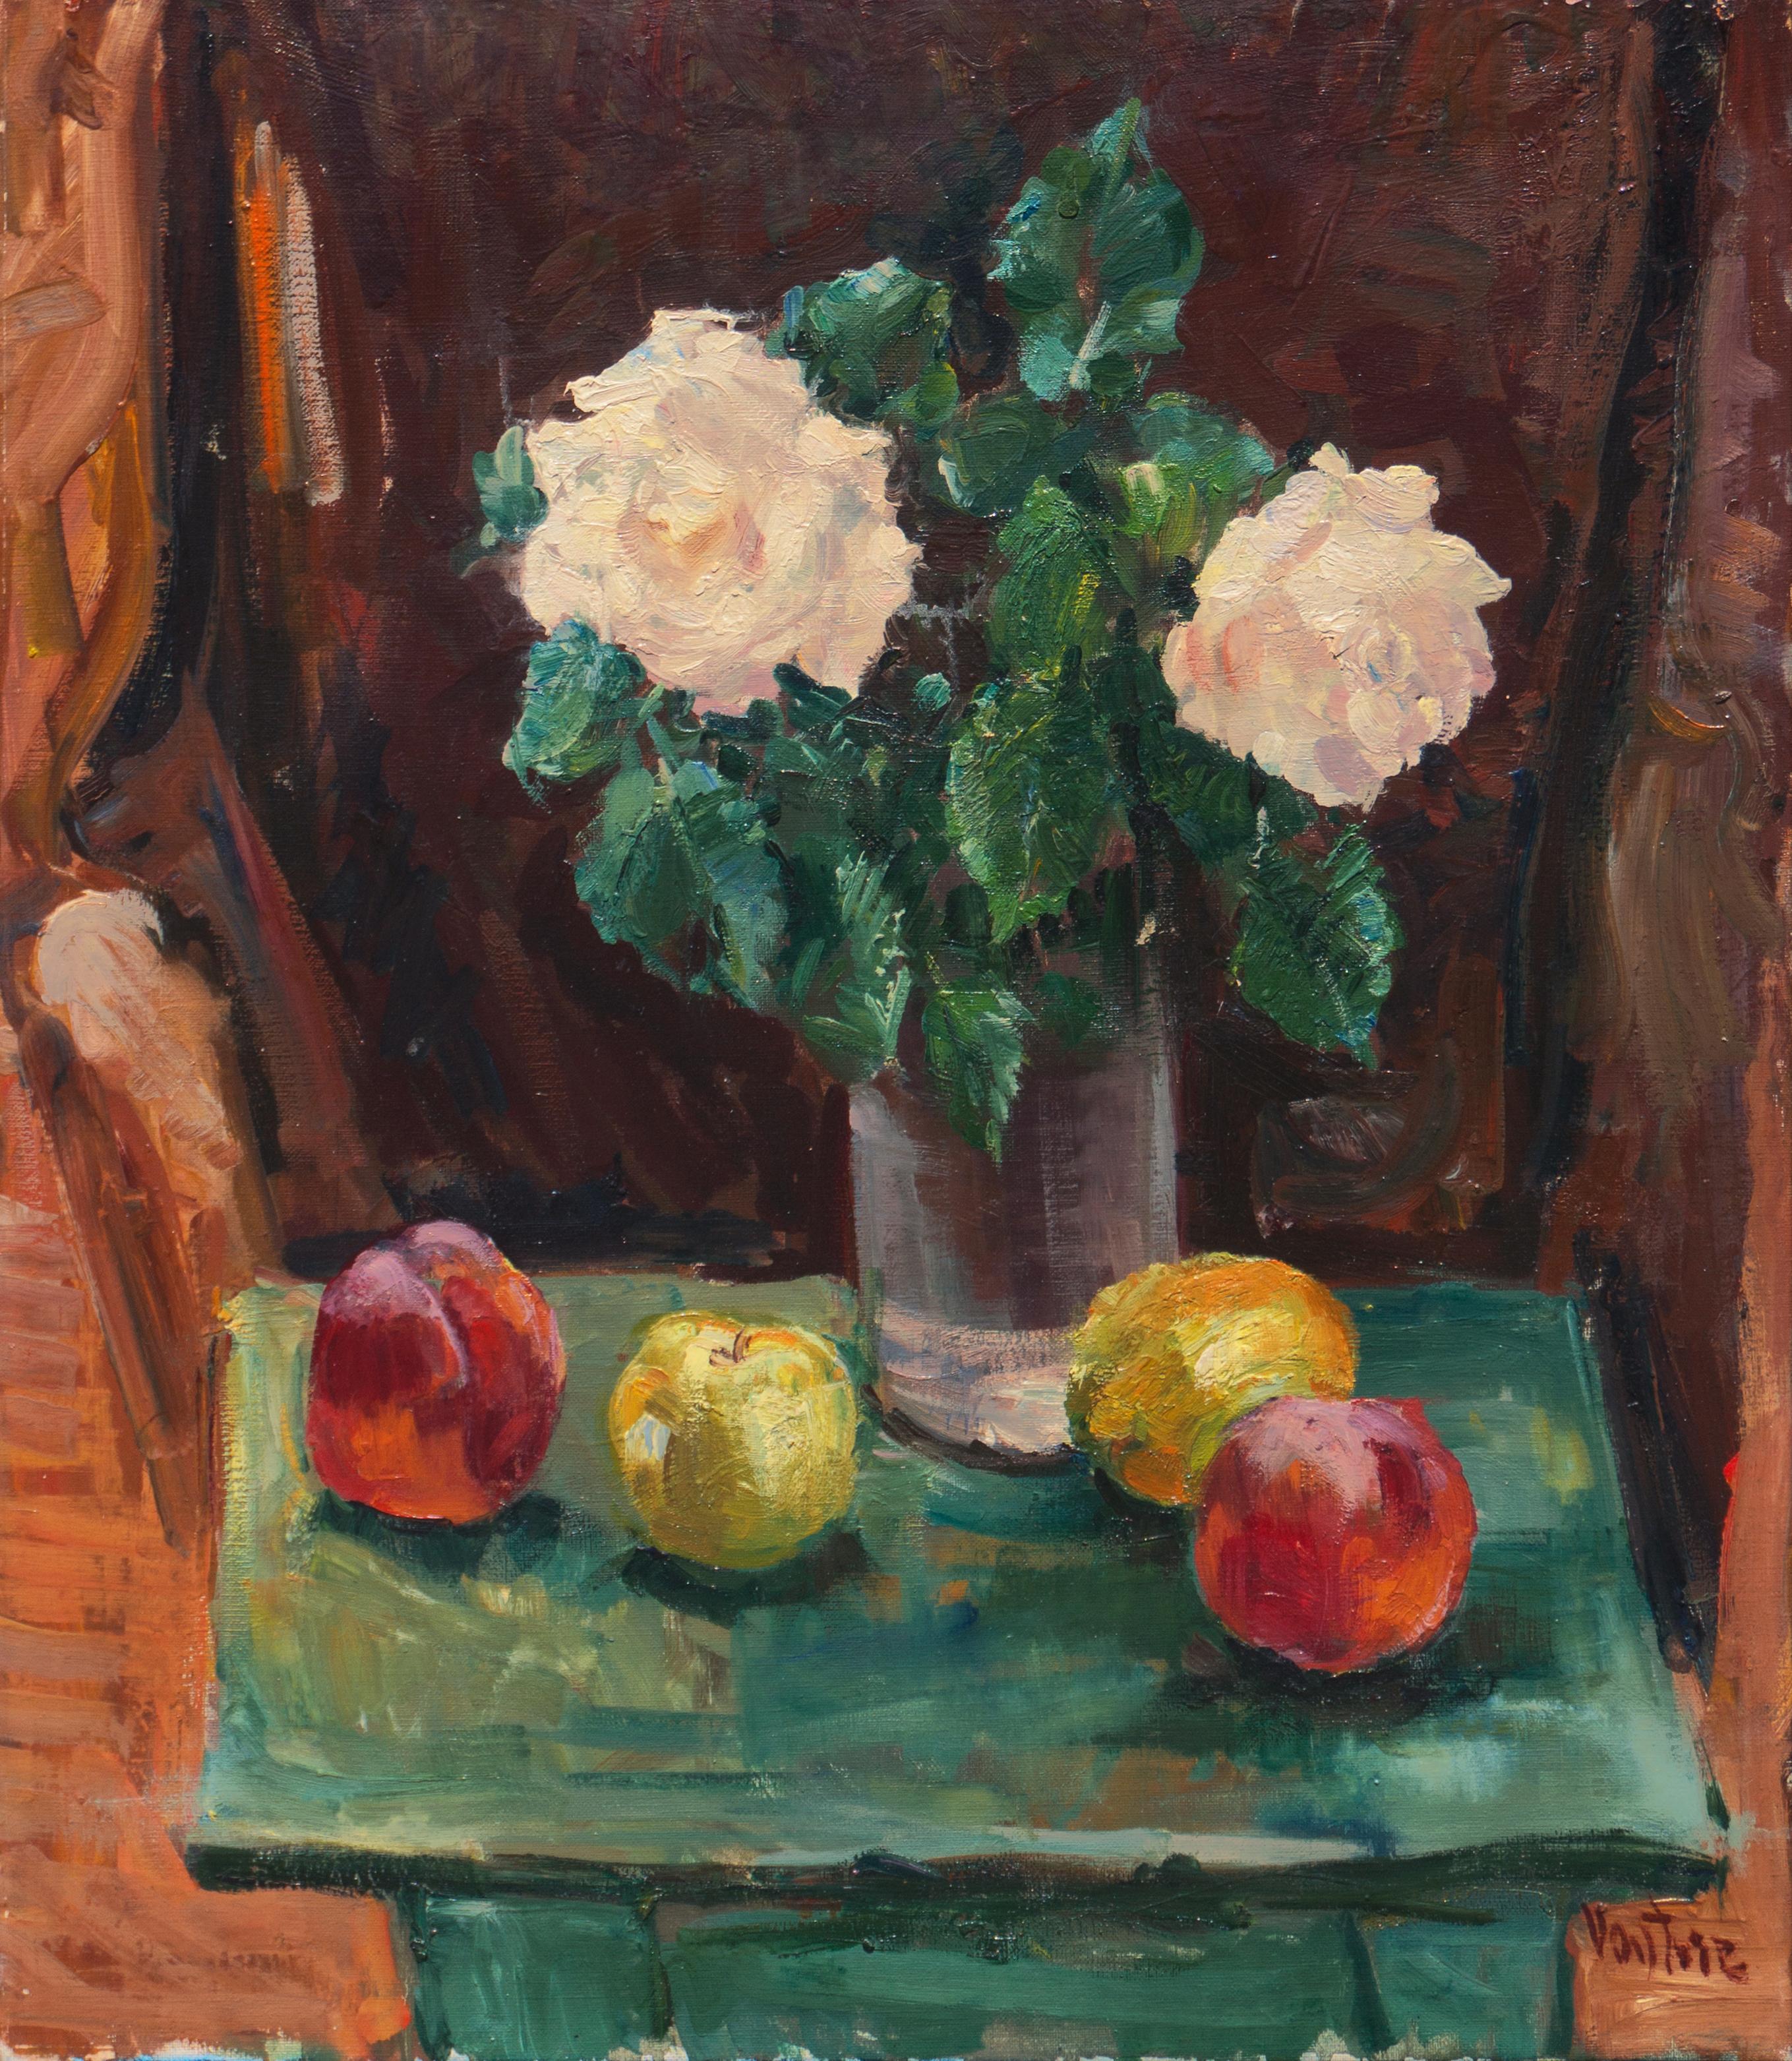 'Peaches, Apples and Roses', Paris, Royal Danish Academy, Charlottenborg Gallery